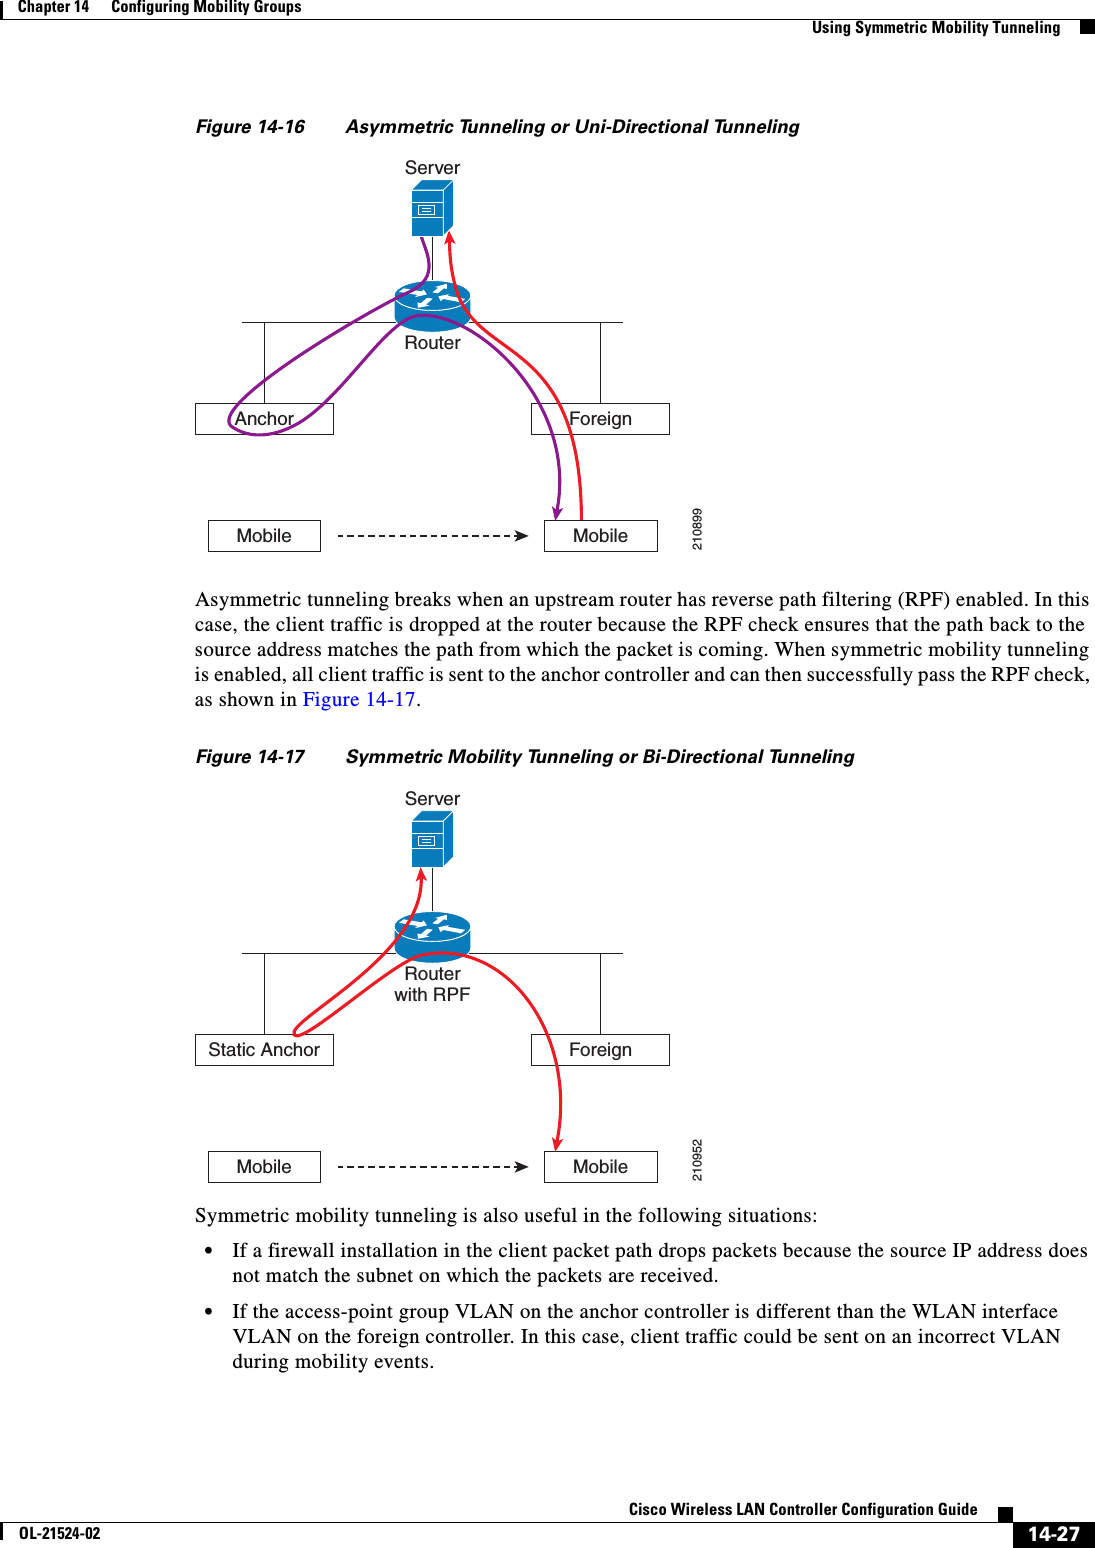  14-27Cisco Wireless LAN Controller Configuration GuideOL-21524-02Chapter 14      Configuring Mobility Groups  Using Symmetric Mobility TunnelingFigure 14-16 Asymmetric Tunneling or Uni-Directional TunnelingAsymmetric tunneling breaks when an upstream router has reverse path filtering (RPF) enabled. In this case, the client traffic is dropped at the router because the RPF check ensures that the path back to the source address matches the path from which the packet is coming. When symmetric mobility tunneling is enabled, all client traffic is sent to the anchor controller and can then successfully pass the RPF check, as shown in Figure 14-17.Figure 14-17 Symmetric Mobility Tunneling or Bi-Directional TunnelingSymmetric mobility tunneling is also useful in the following situations:  • If a firewall installation in the client packet path drops packets because the source IP address does not match the subnet on which the packets are received.  • If the access-point group VLAN on the anchor controller is different than the WLAN interface VLAN on the foreign controller. In this case, client traffic could be sent on an incorrect VLAN during mobility events.RouterServerAnchor ForeignMobile210899MobileRouterwith RPFServerStatic Anchor ForeignMobileMobile210952